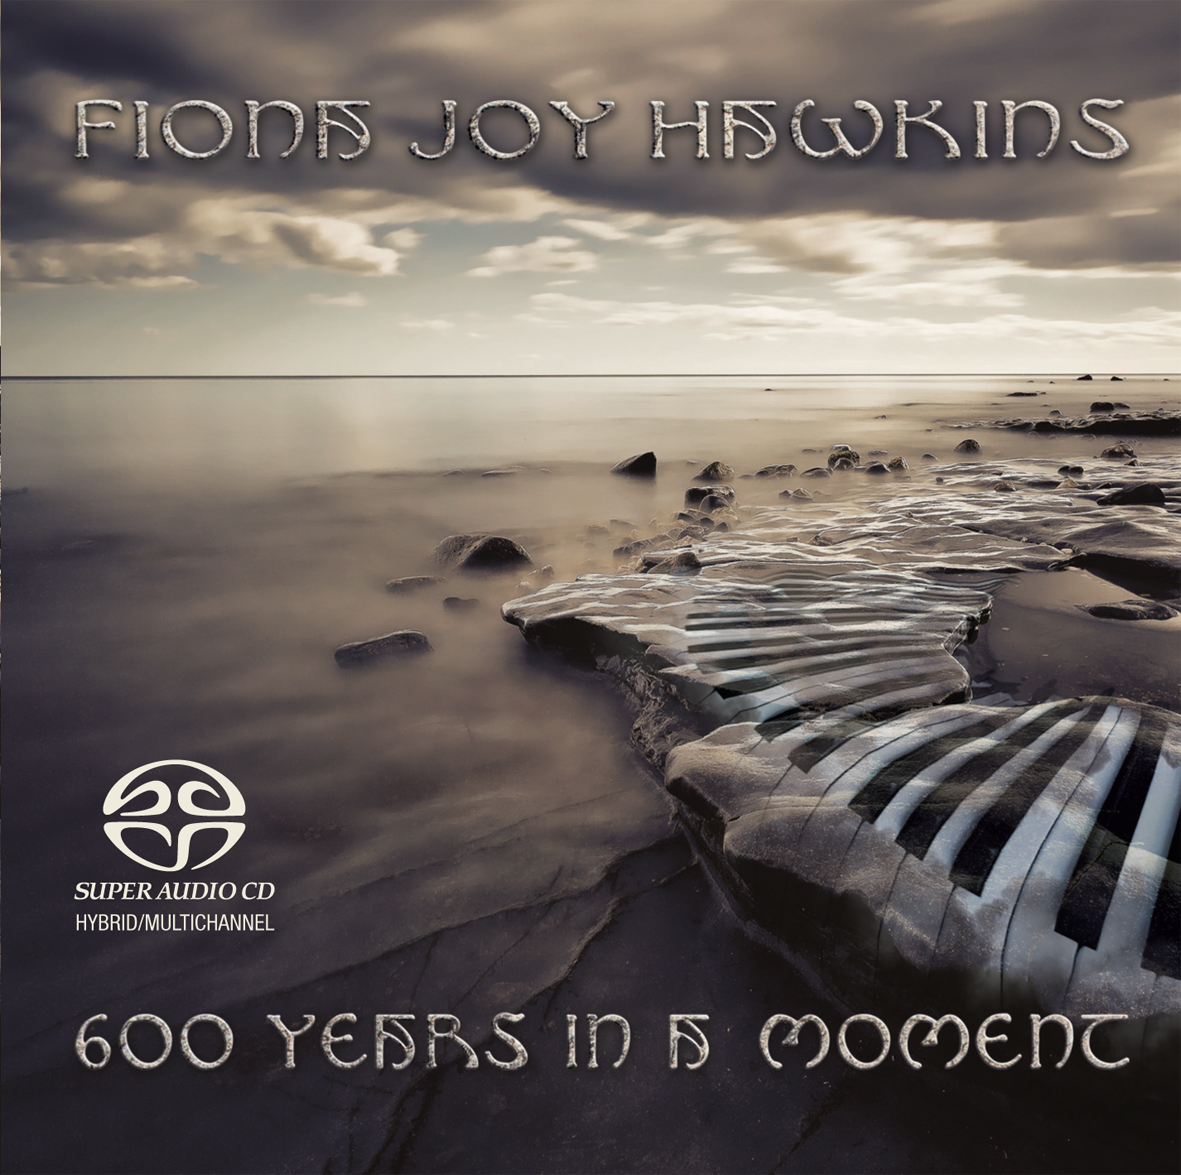 Fiona Joy to promote SACD & Vinyl versions of her award-winning Instrumental Piano albums at T.H.E. Show in Newport Beach on May 30 - June 1st.